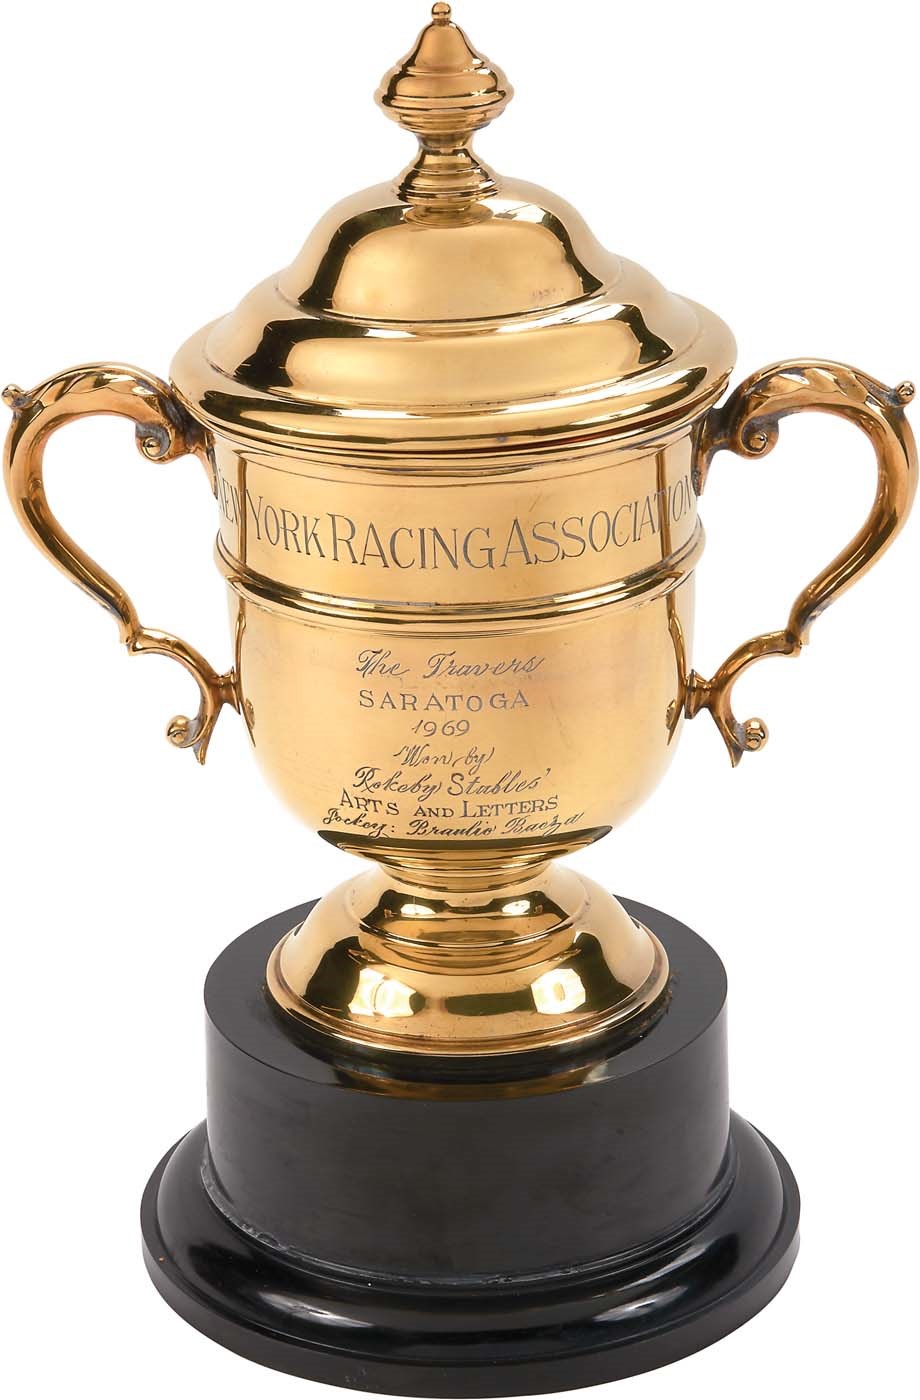 1969 Arts & Letters Gold Plated Travers Winning Trophy Cup from the Personal Collection of Braulio Baeza